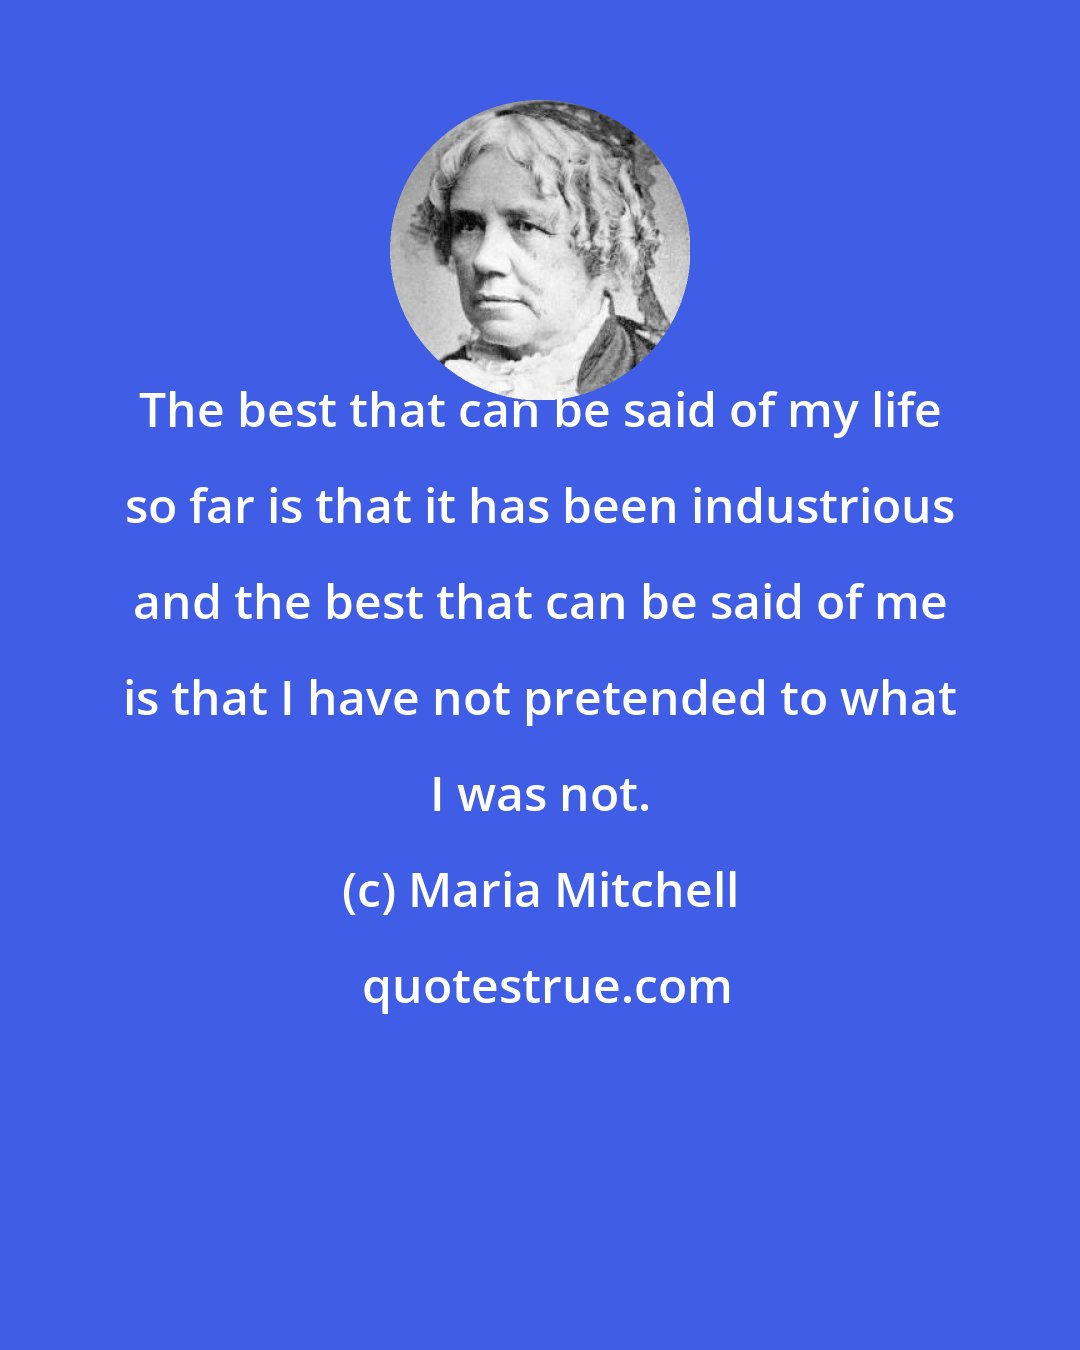 Maria Mitchell: The best that can be said of my life so far is that it has been industrious and the best that can be said of me is that I have not pretended to what I was not.